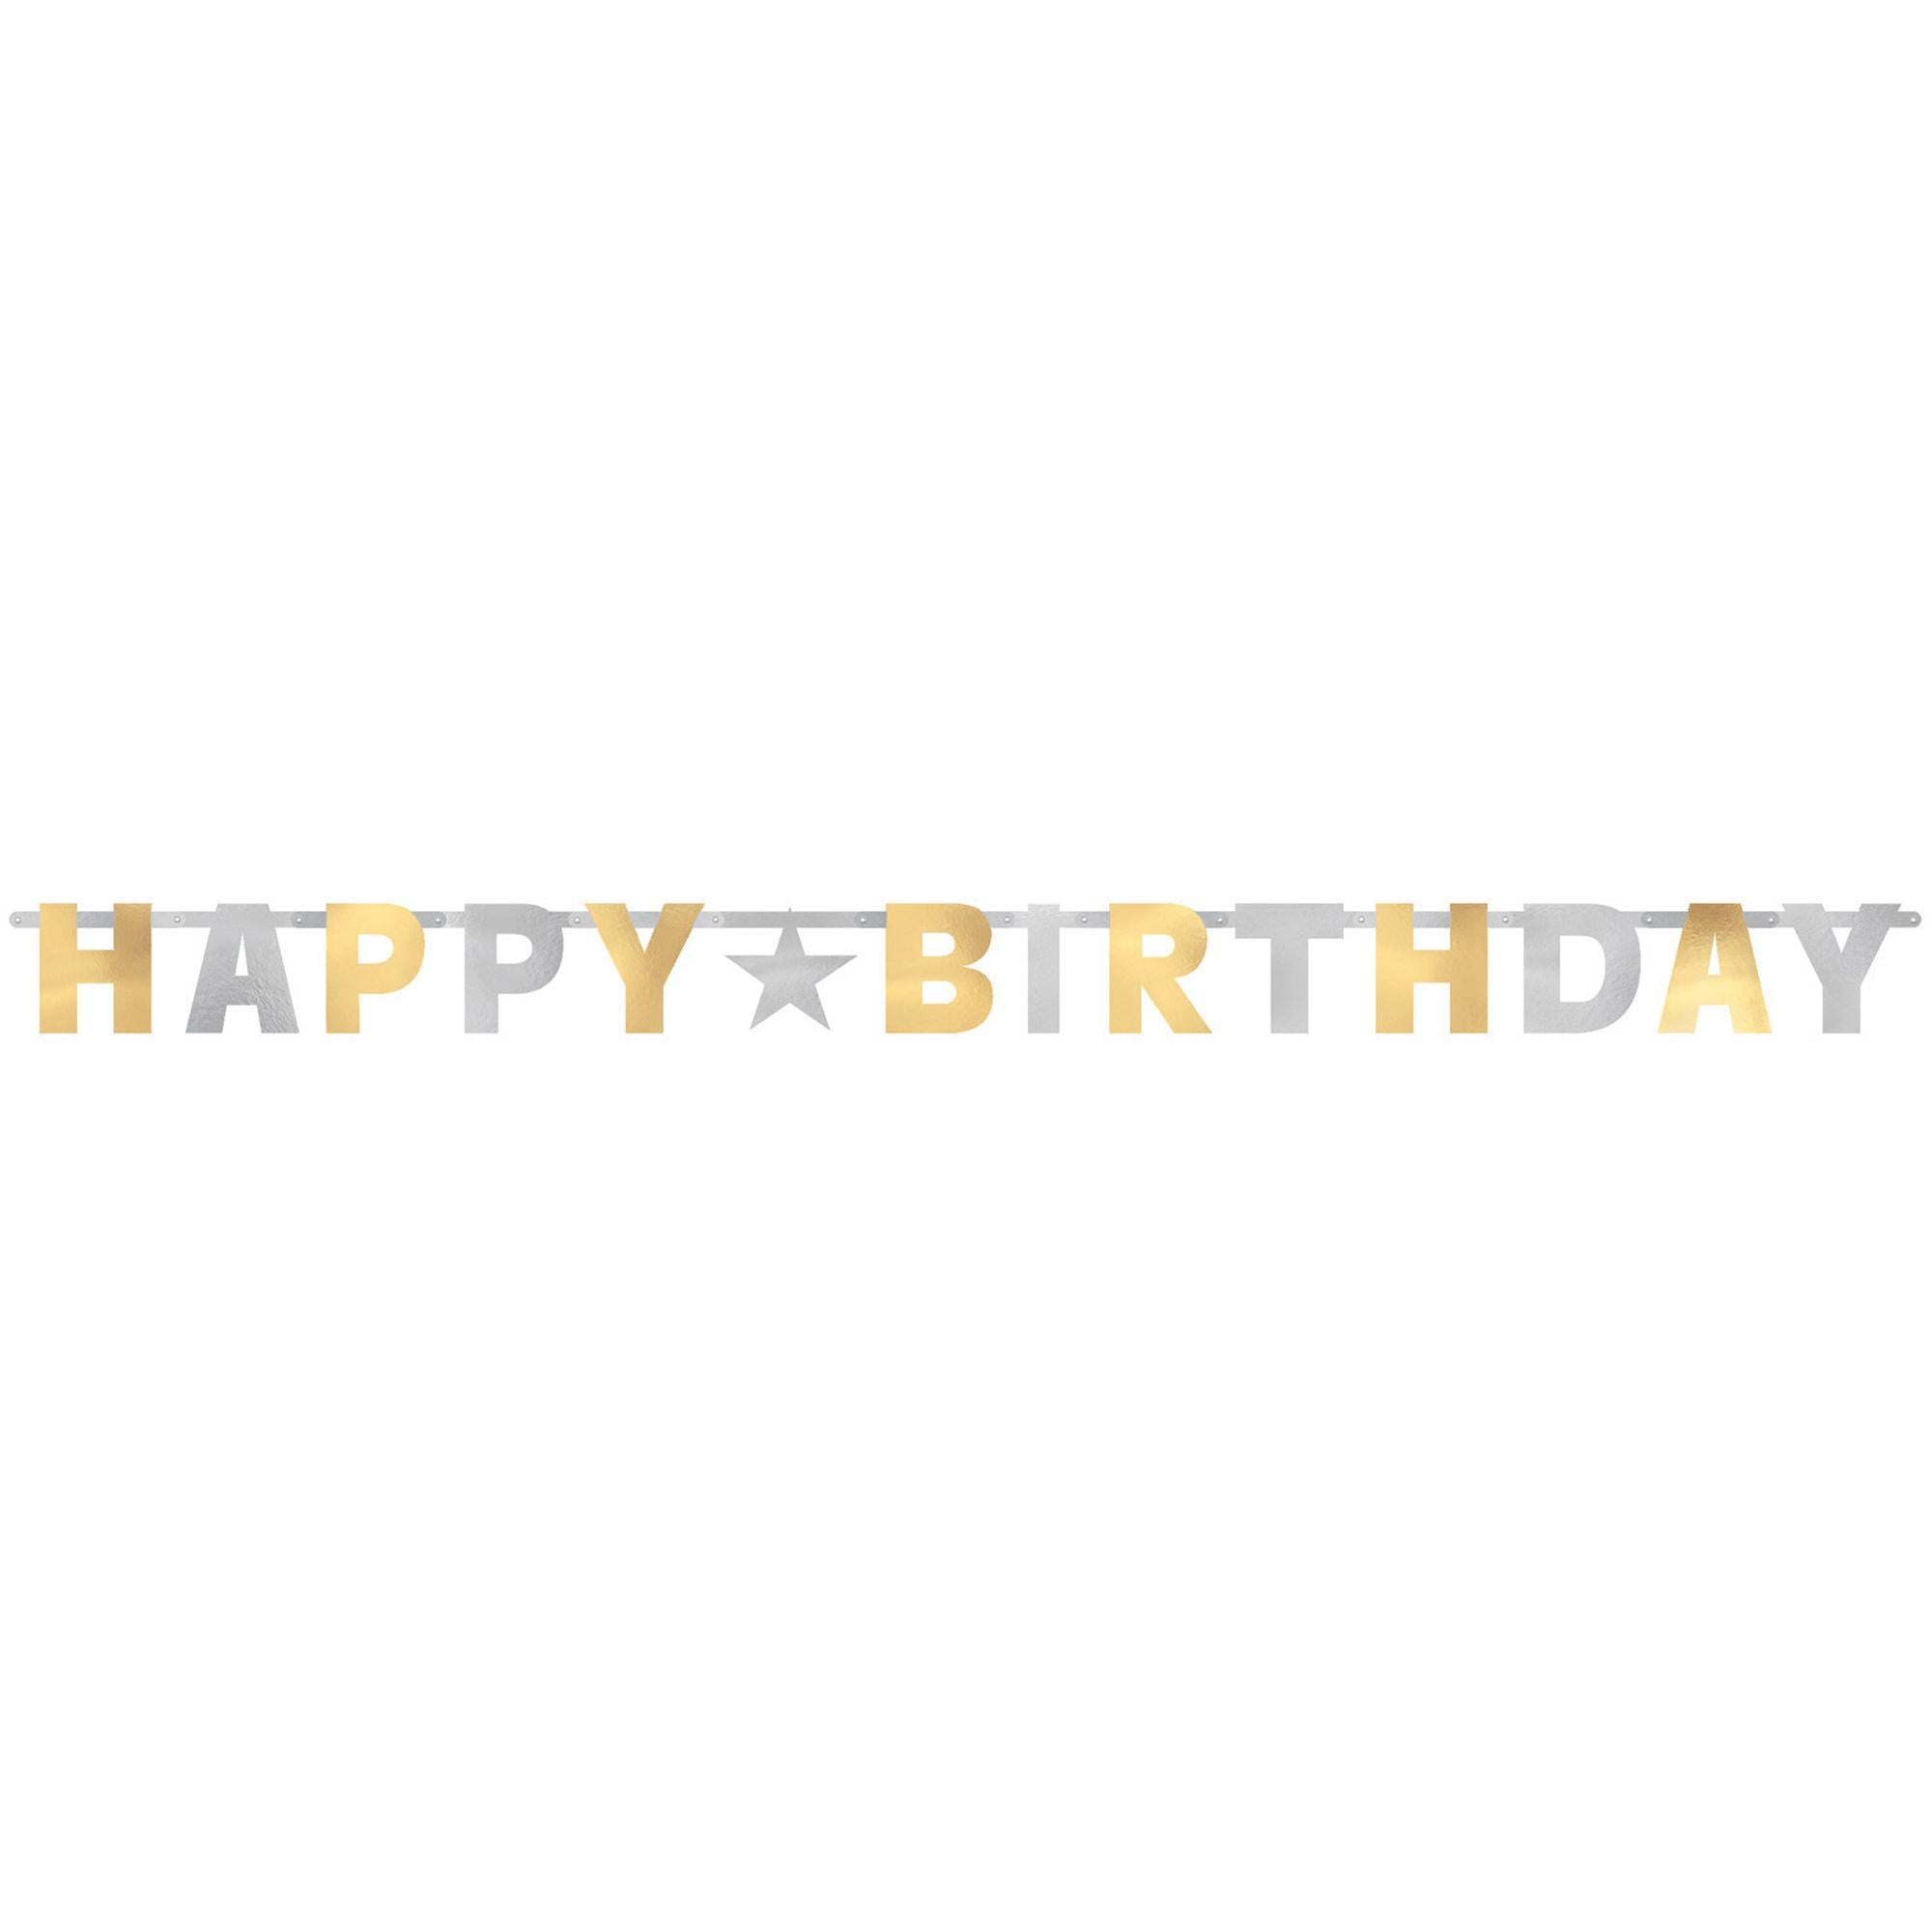 Happy Birthday Gold Silver Letter Banner 240cm Decorations - Party Centre